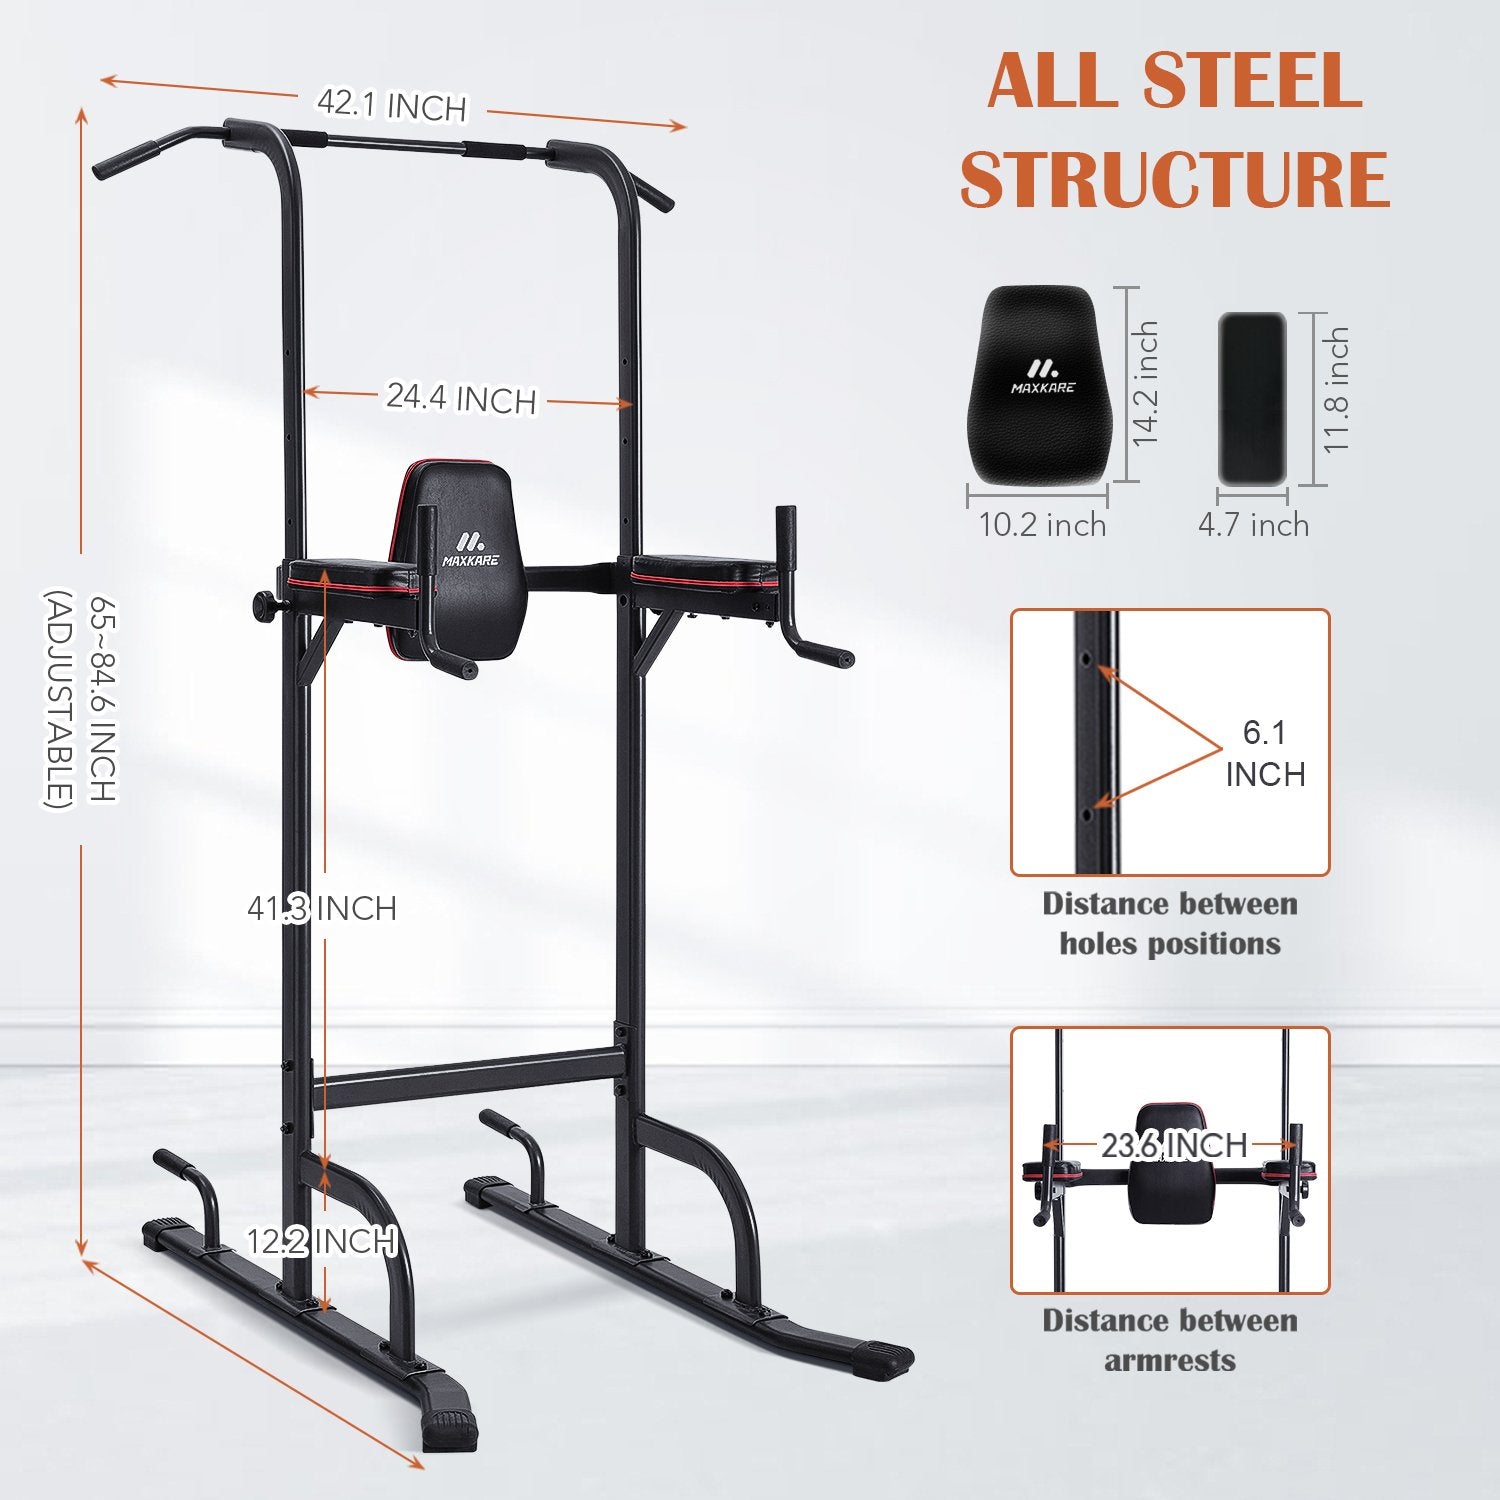 Load image into Gallery viewer, 4 Level Adjustable Power Tower Workout Dip Stand Pull Up Bar Station-Strength Training Fitness Exercise Equipment for Home Gym-New Version
